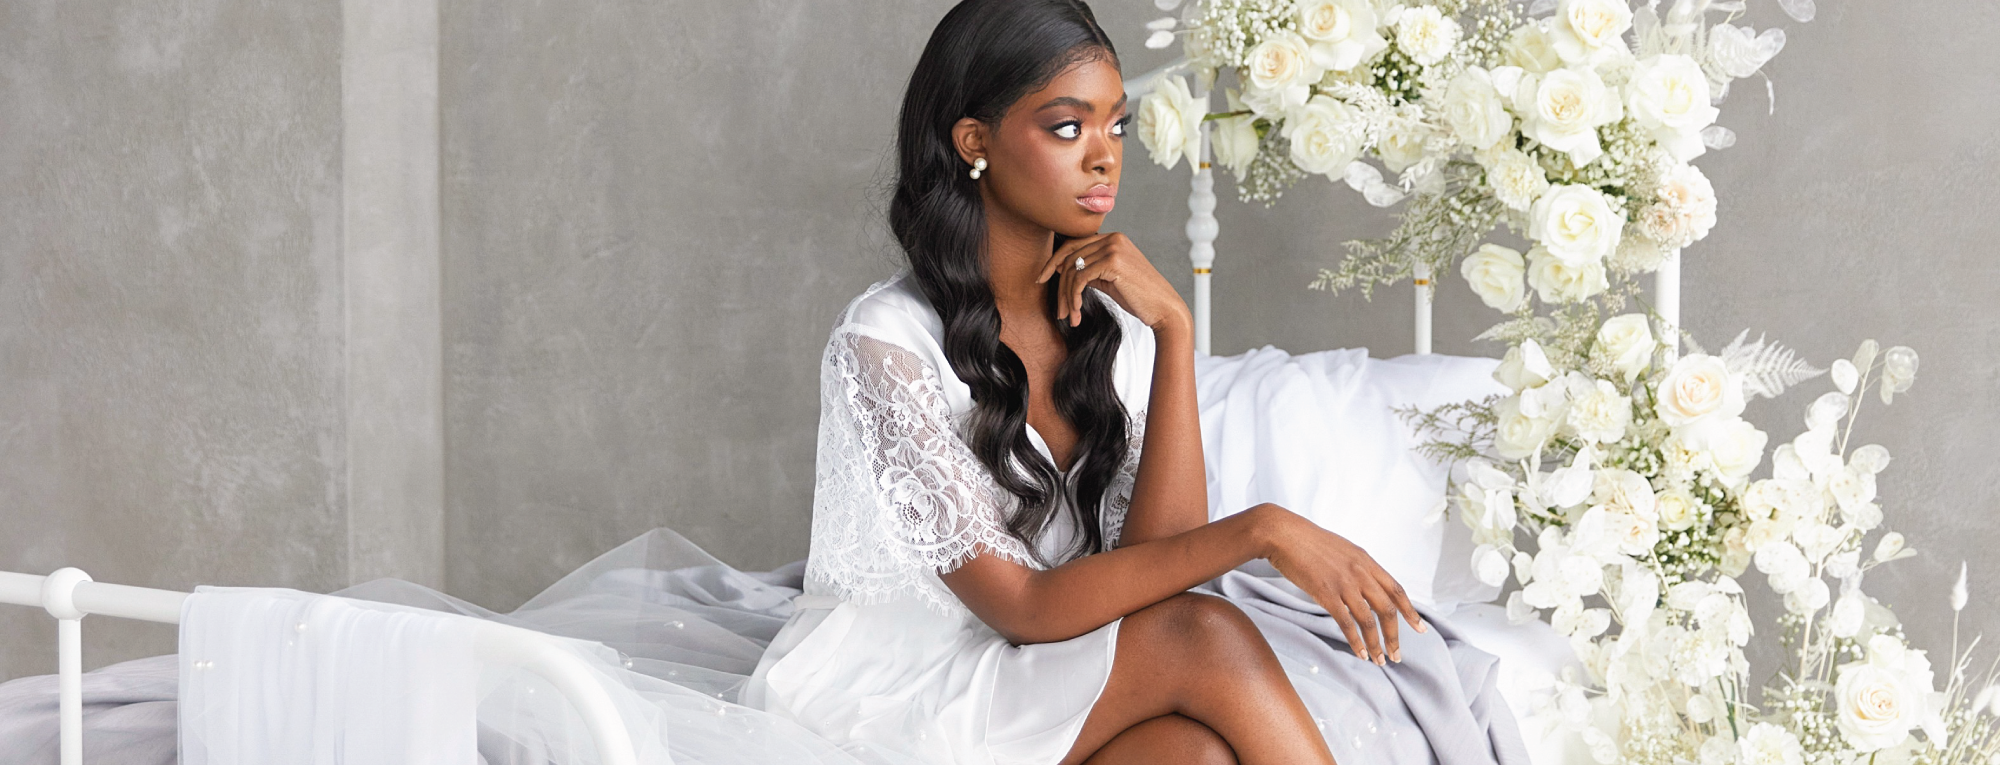 White Bridal Robes & Luxury Lace Robes For Getting Ready